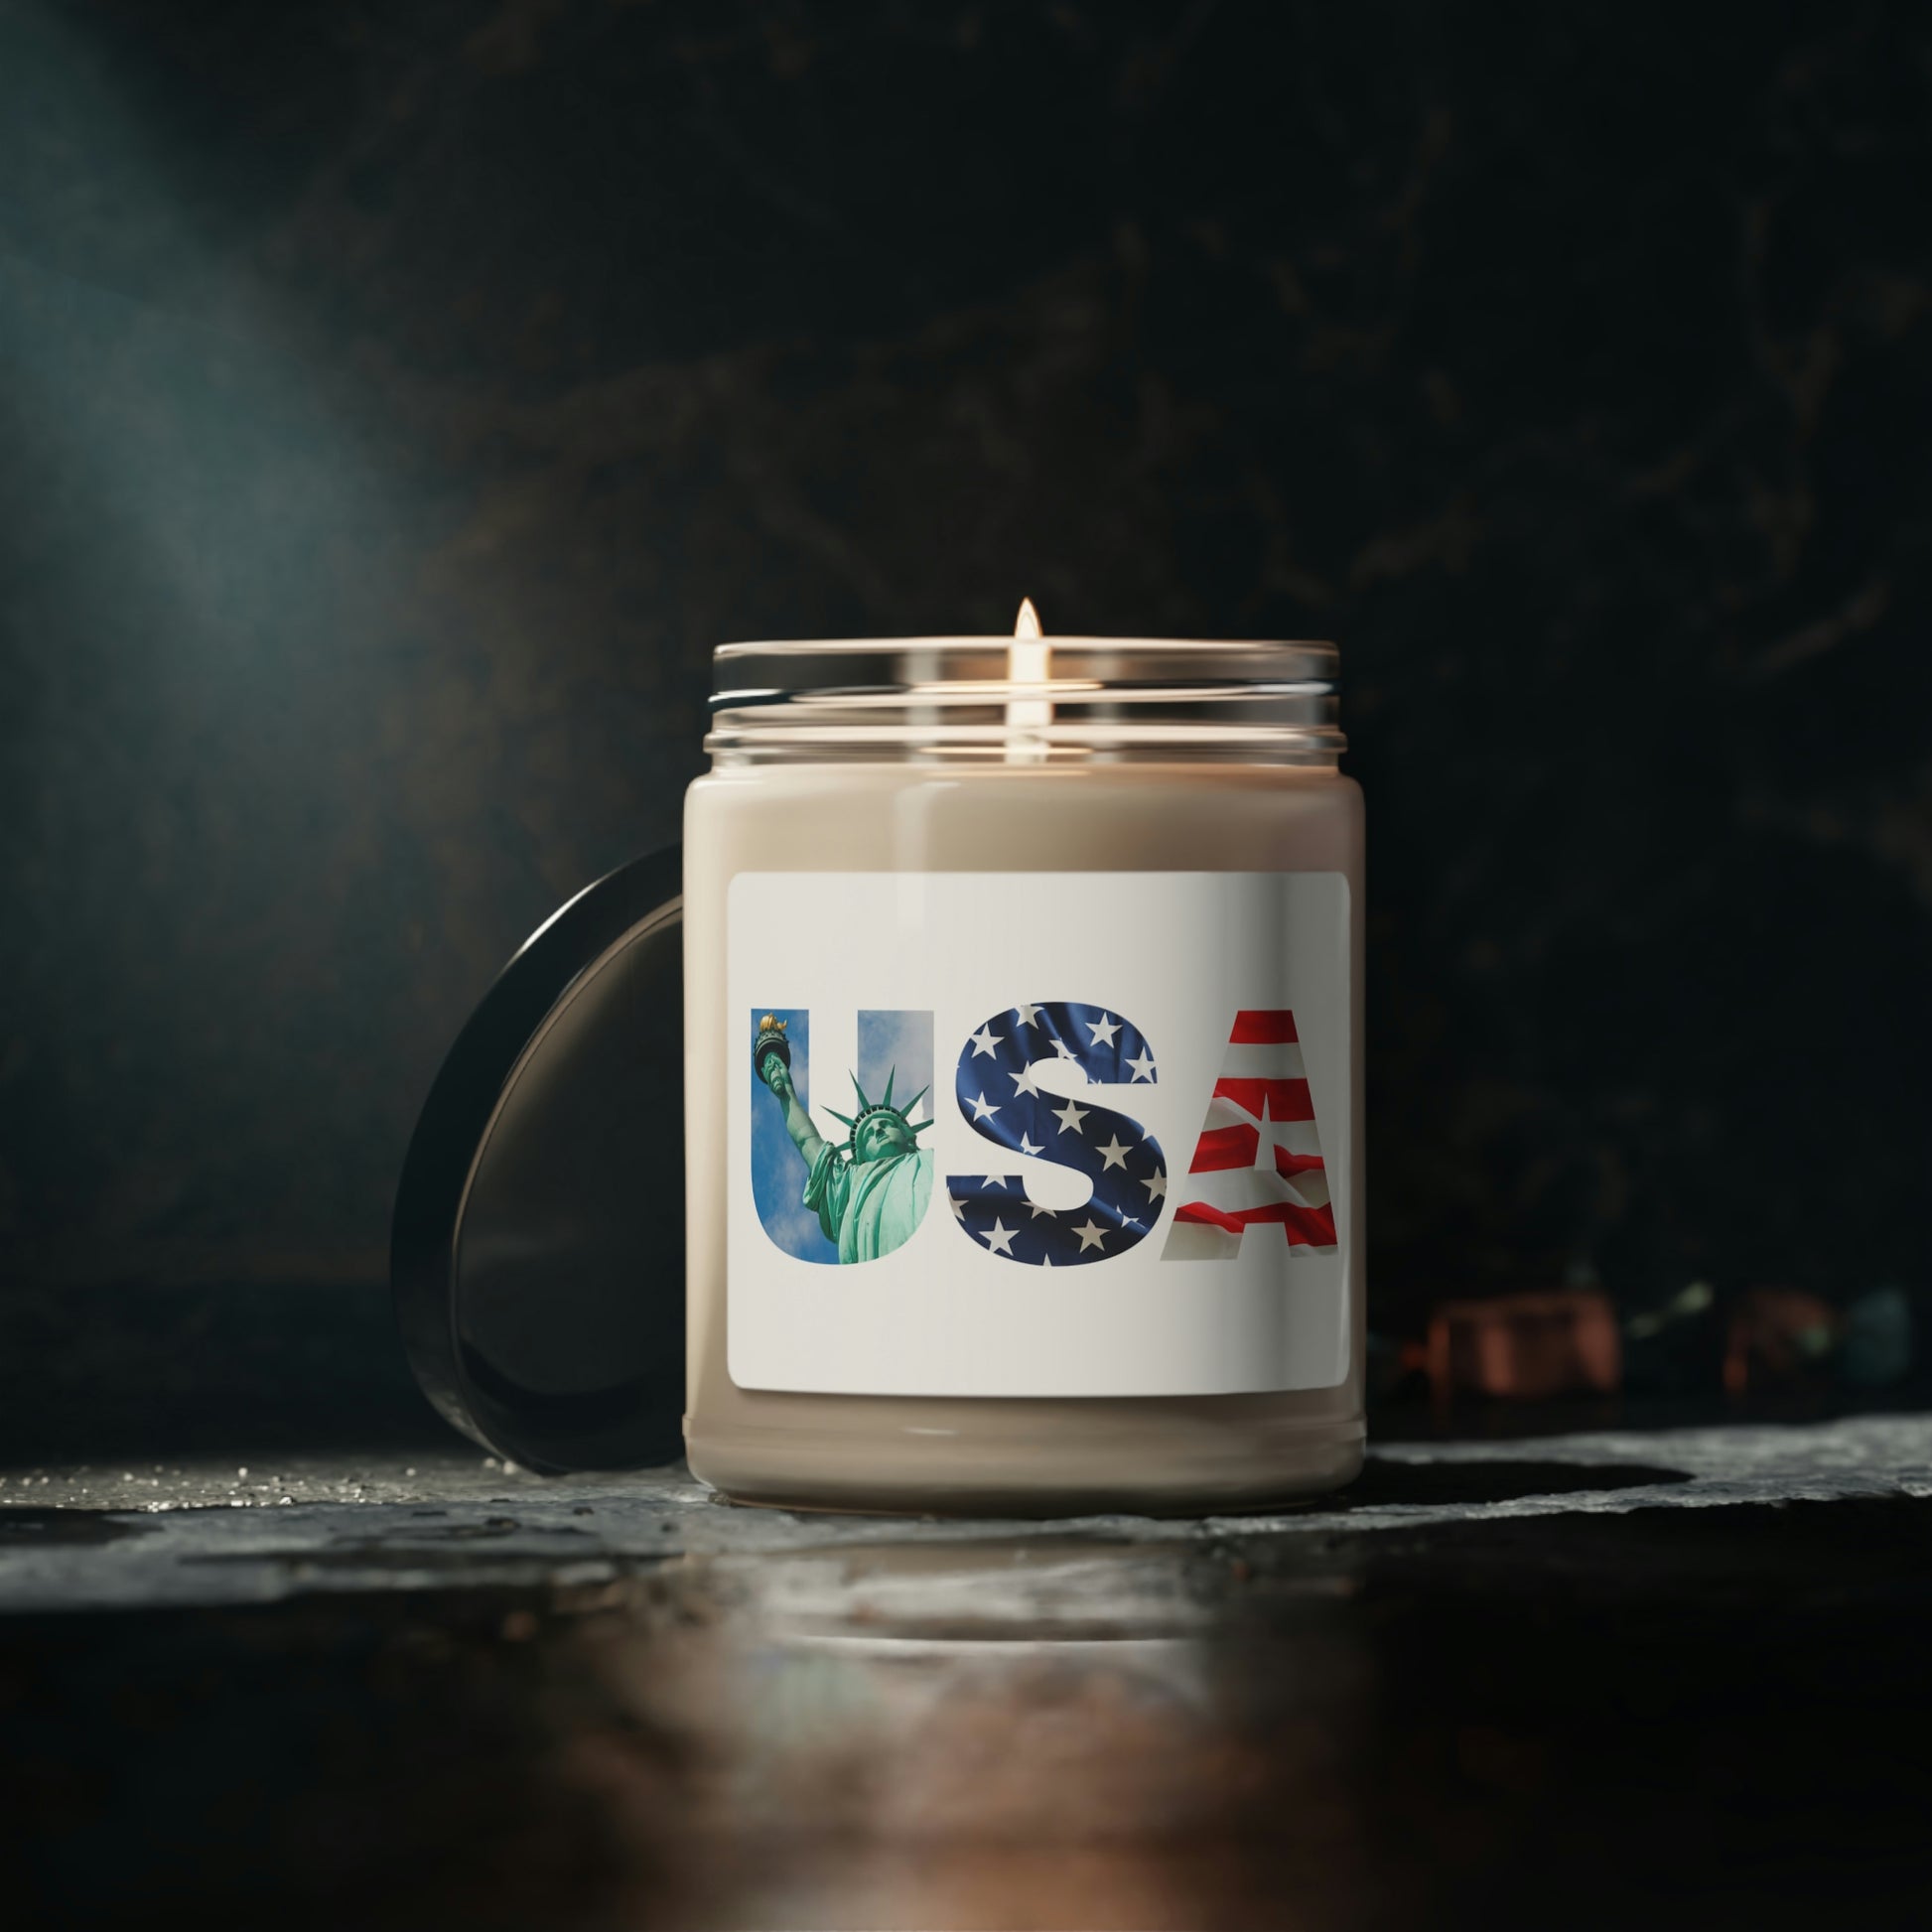 "USA" Candle - Weave Got Gifts - Unique Gifts You Won’t Find Anywhere Else!